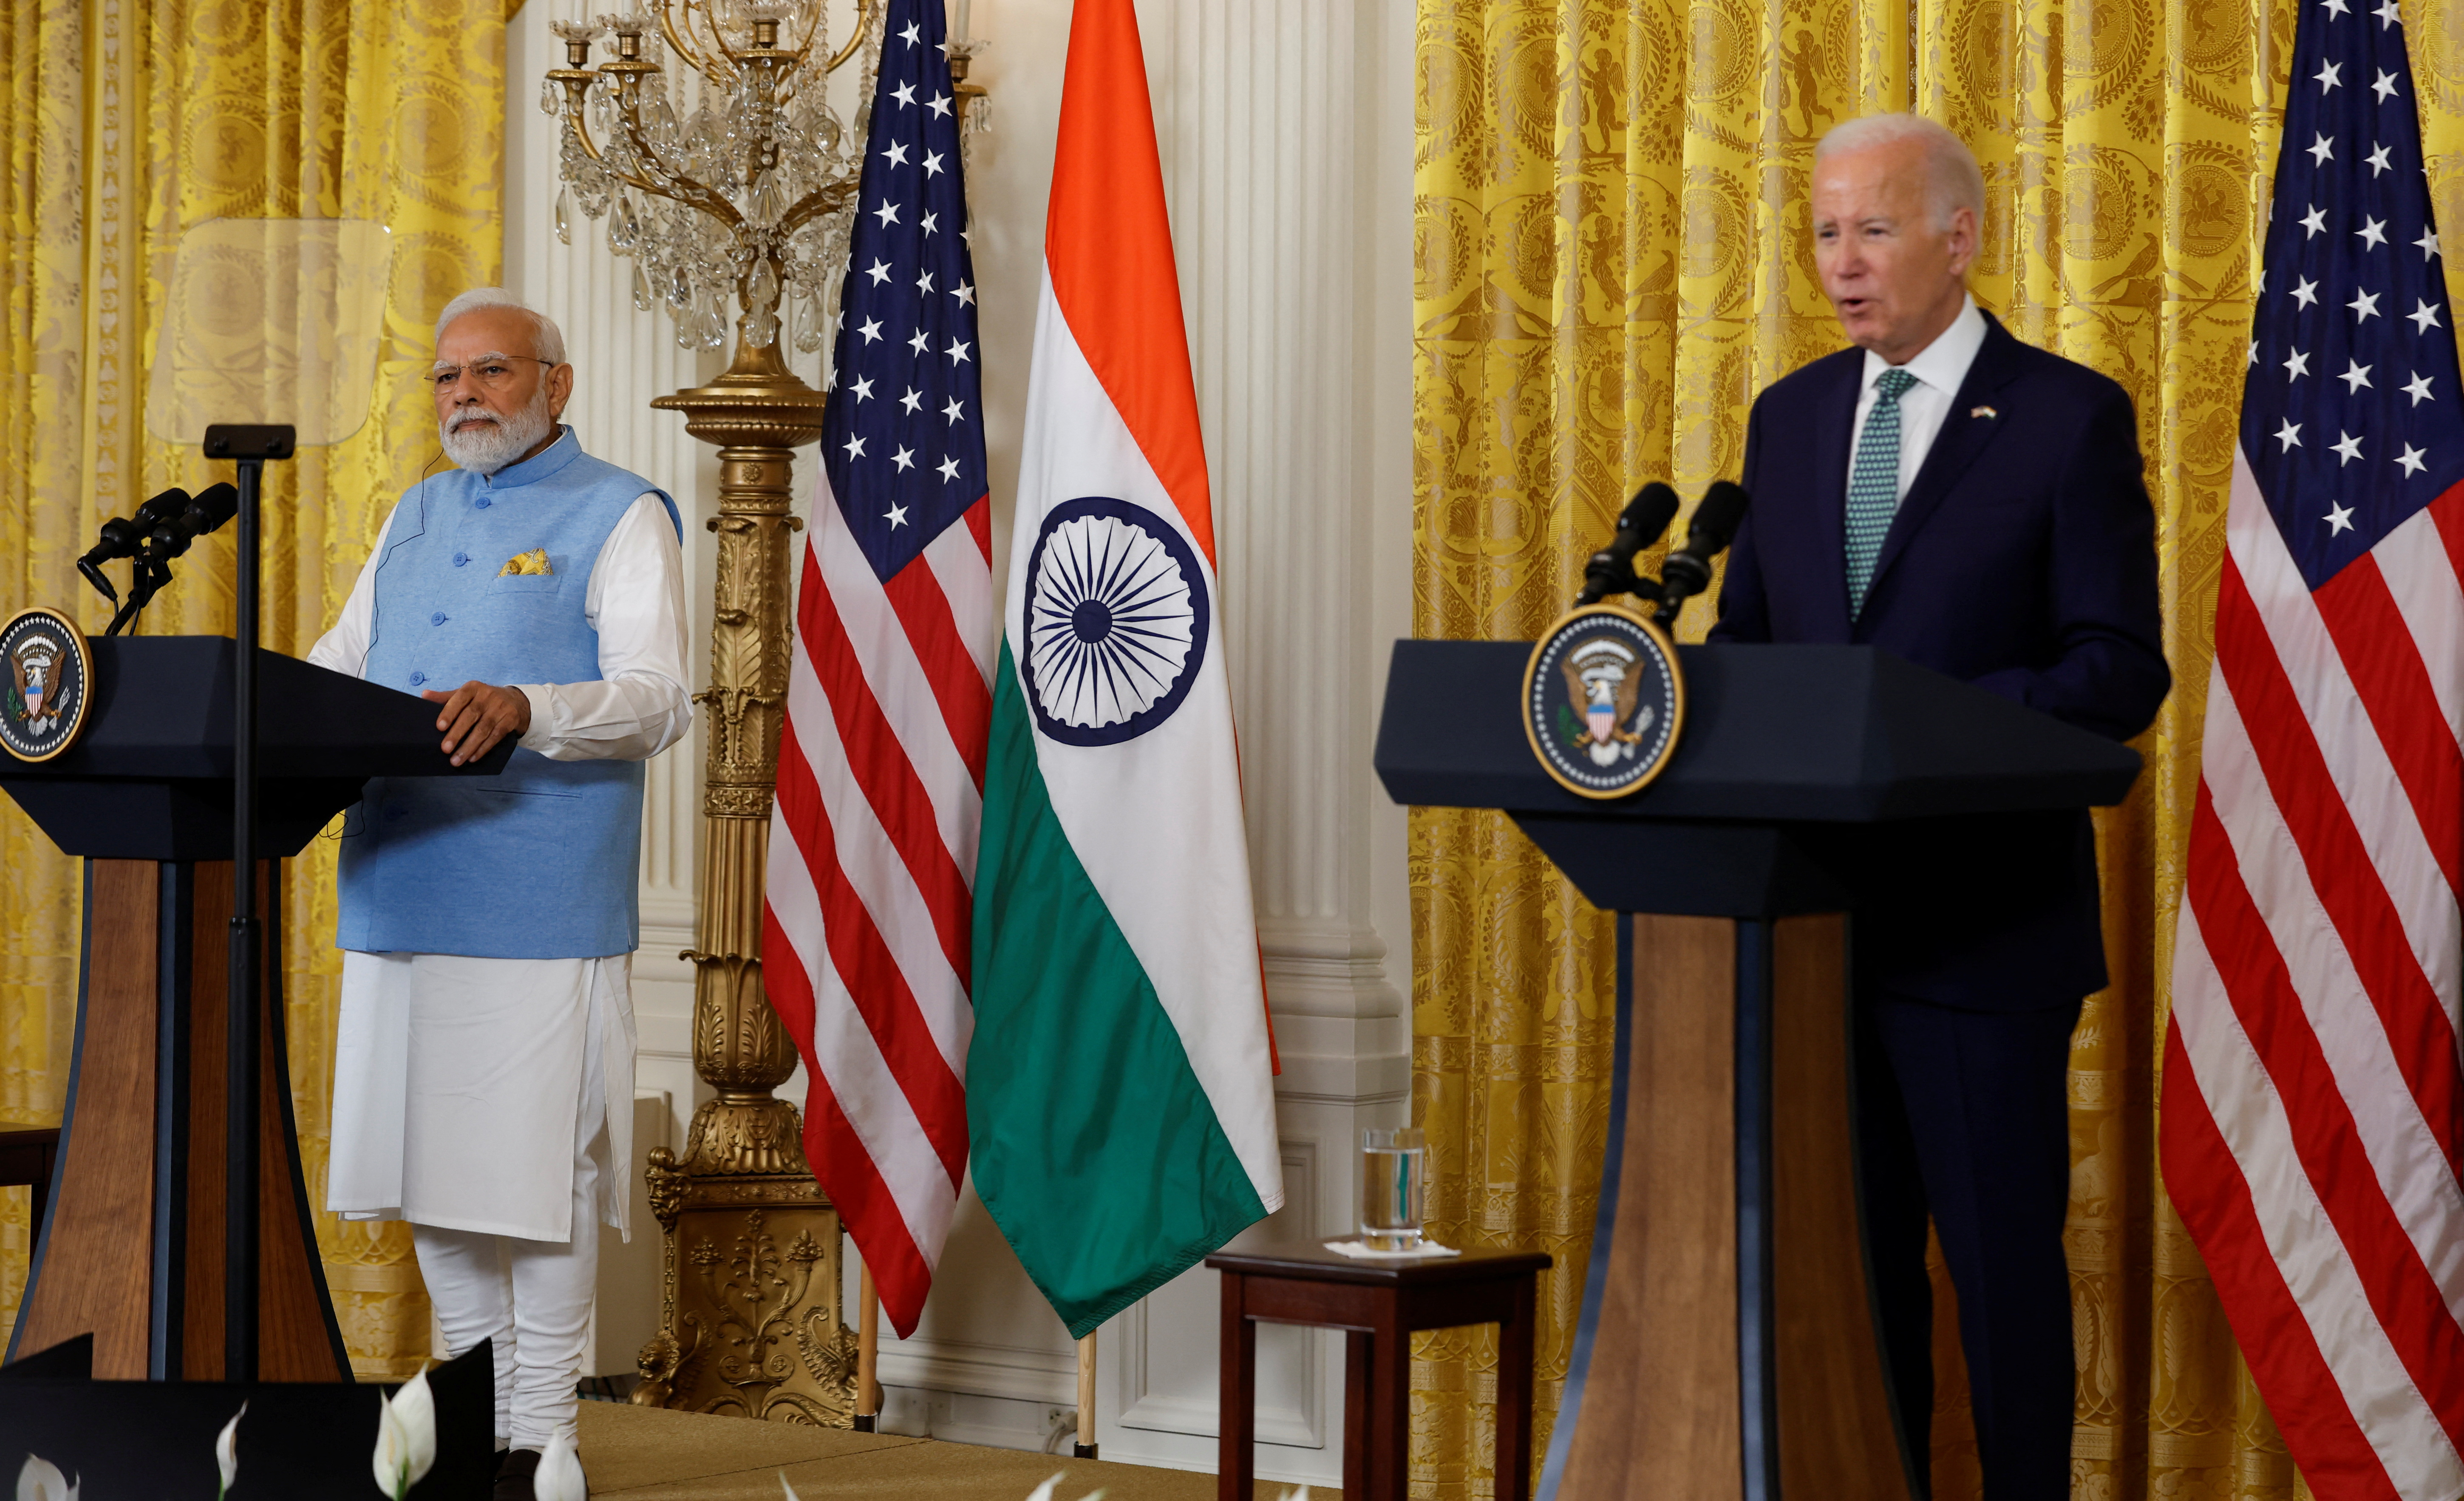 U.S. President Joe Biden and India’s Prime Minister Narendra Modi hold joint press conference at the White House in Washington